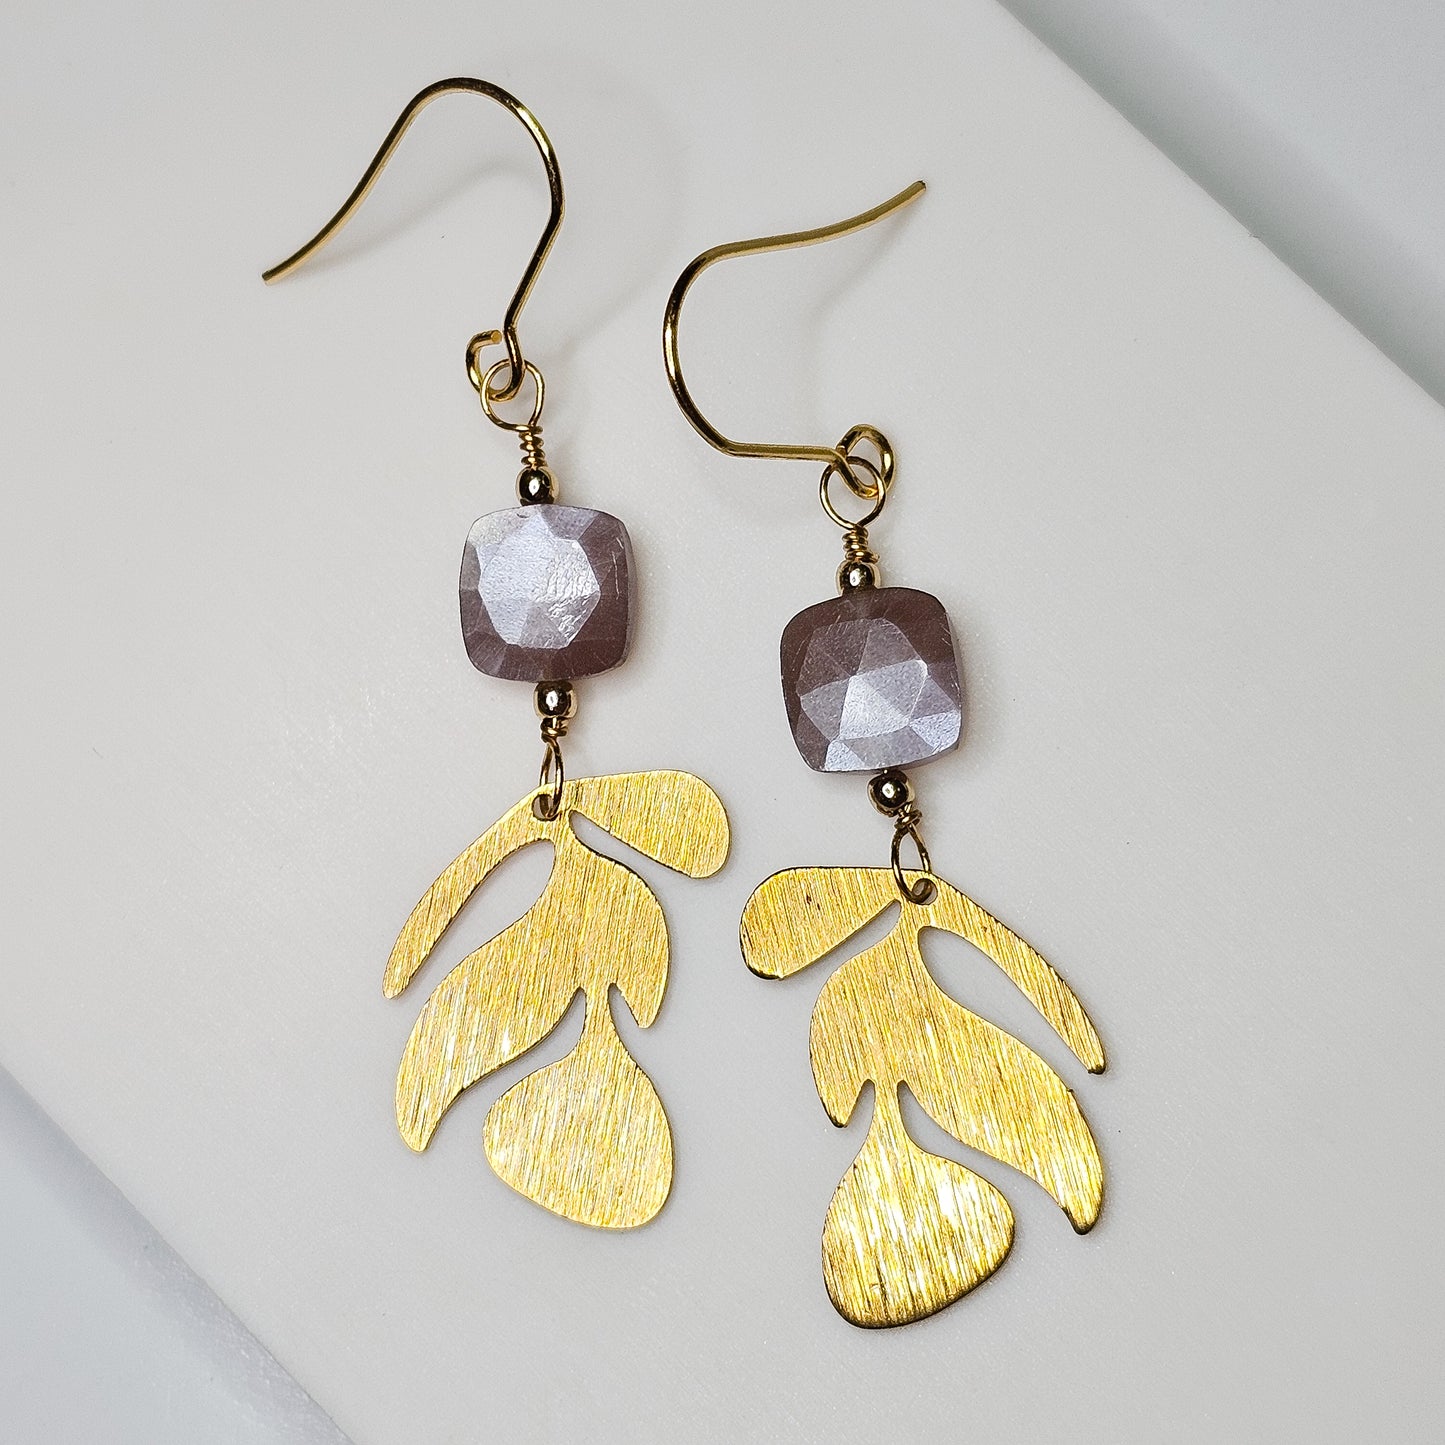 Brushed brass leaf charms suspended from silver flash Chocolate Moonstones beads, hanging from gold toned stainless steel ear wires.